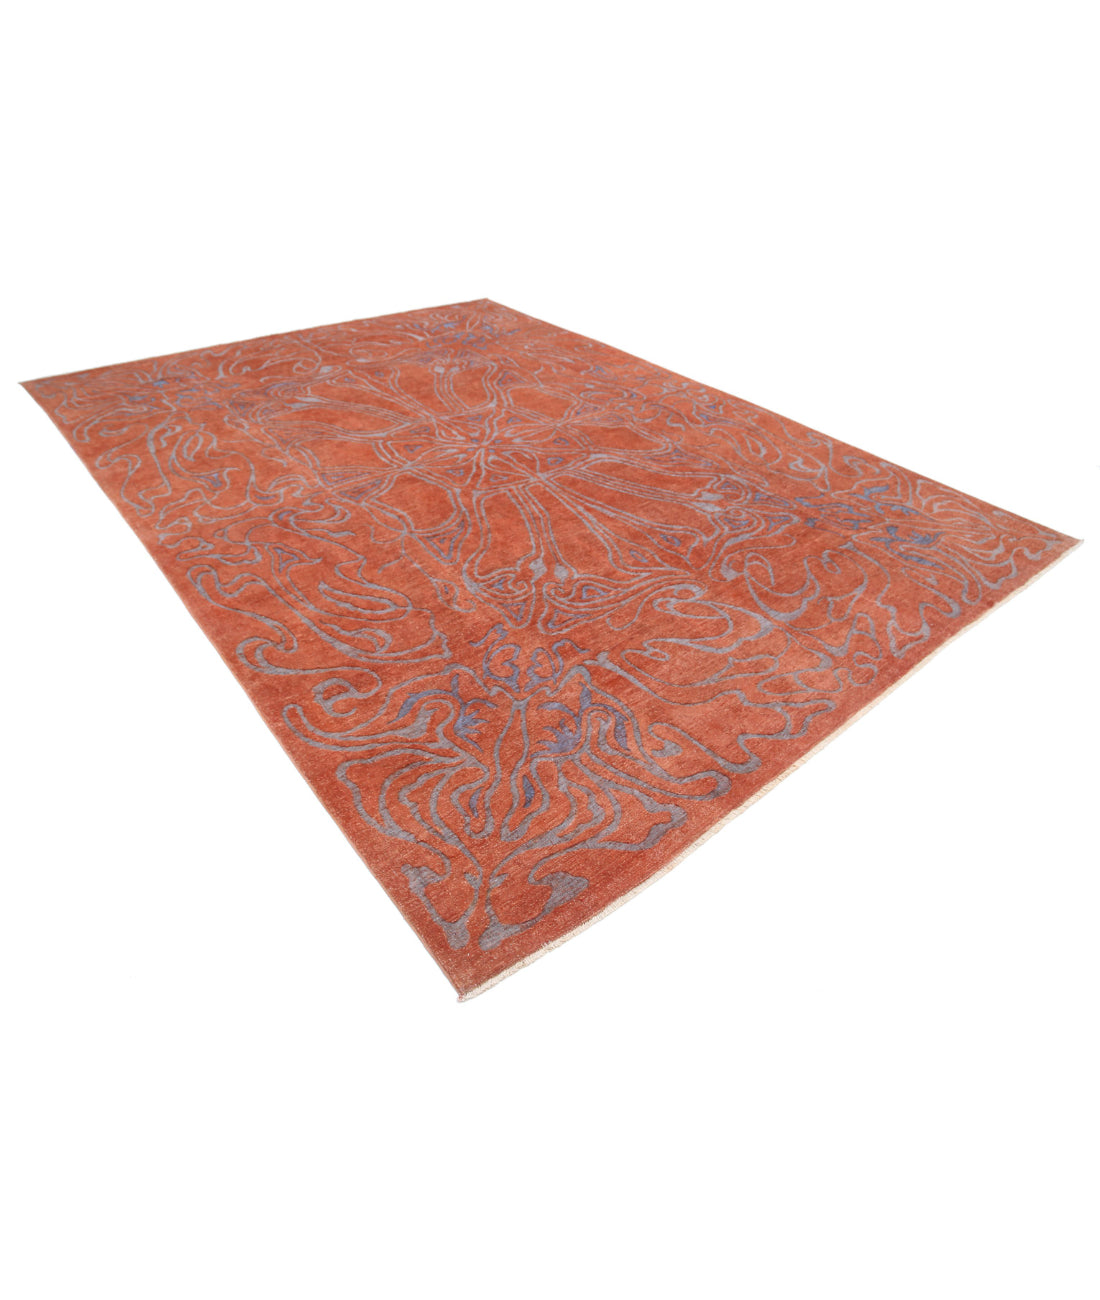 Hand Knotted Onyx Wool Rug - 8'9'' x 11'10'' 8'9'' x 11'10'' (263 X 355) / Pink / Grey